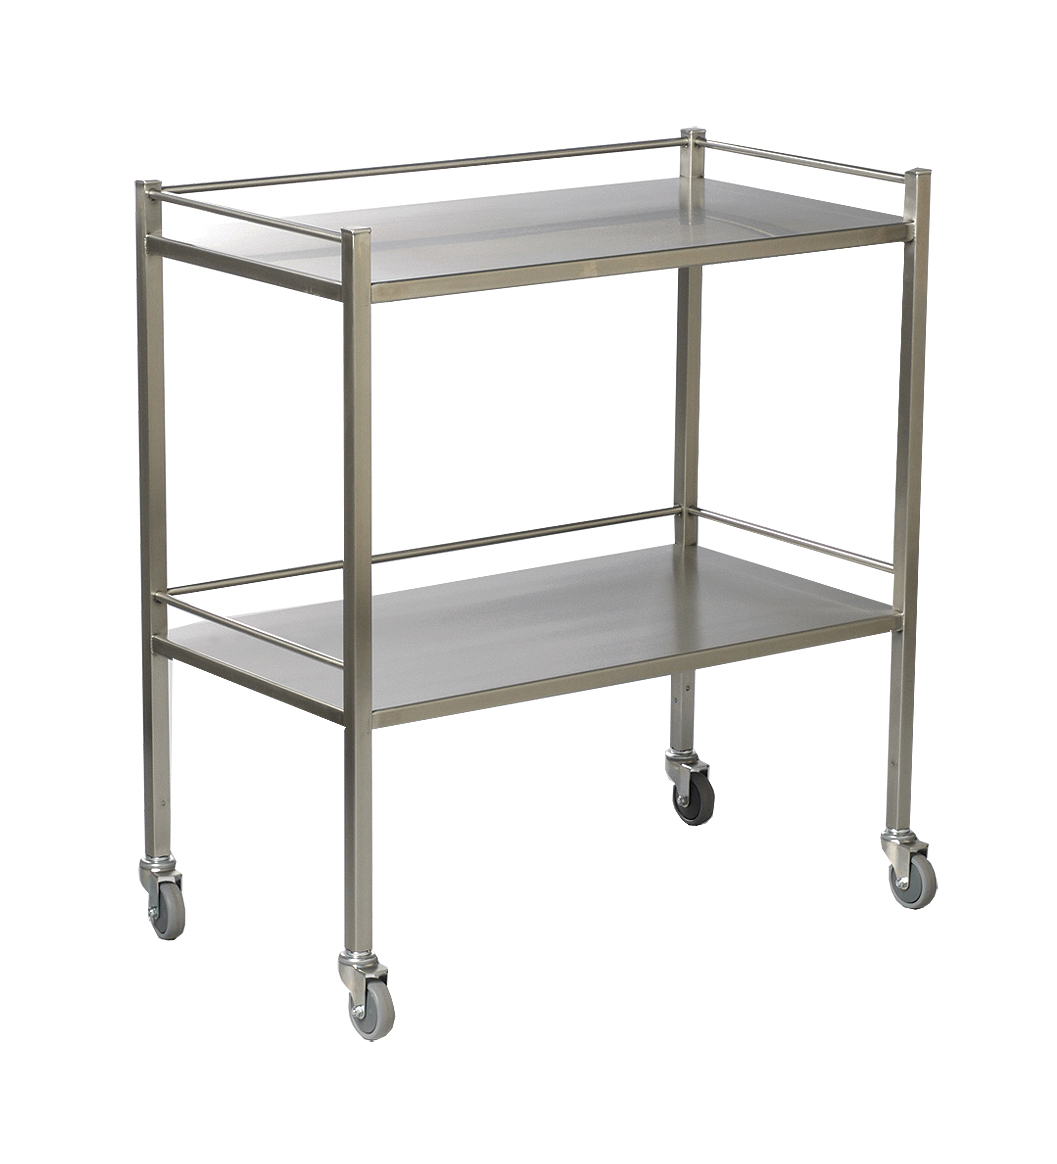 Stainless Steel Dressing Clinicart Trolley Instrument - 2 Tier with Rails - 1200 x 600mm